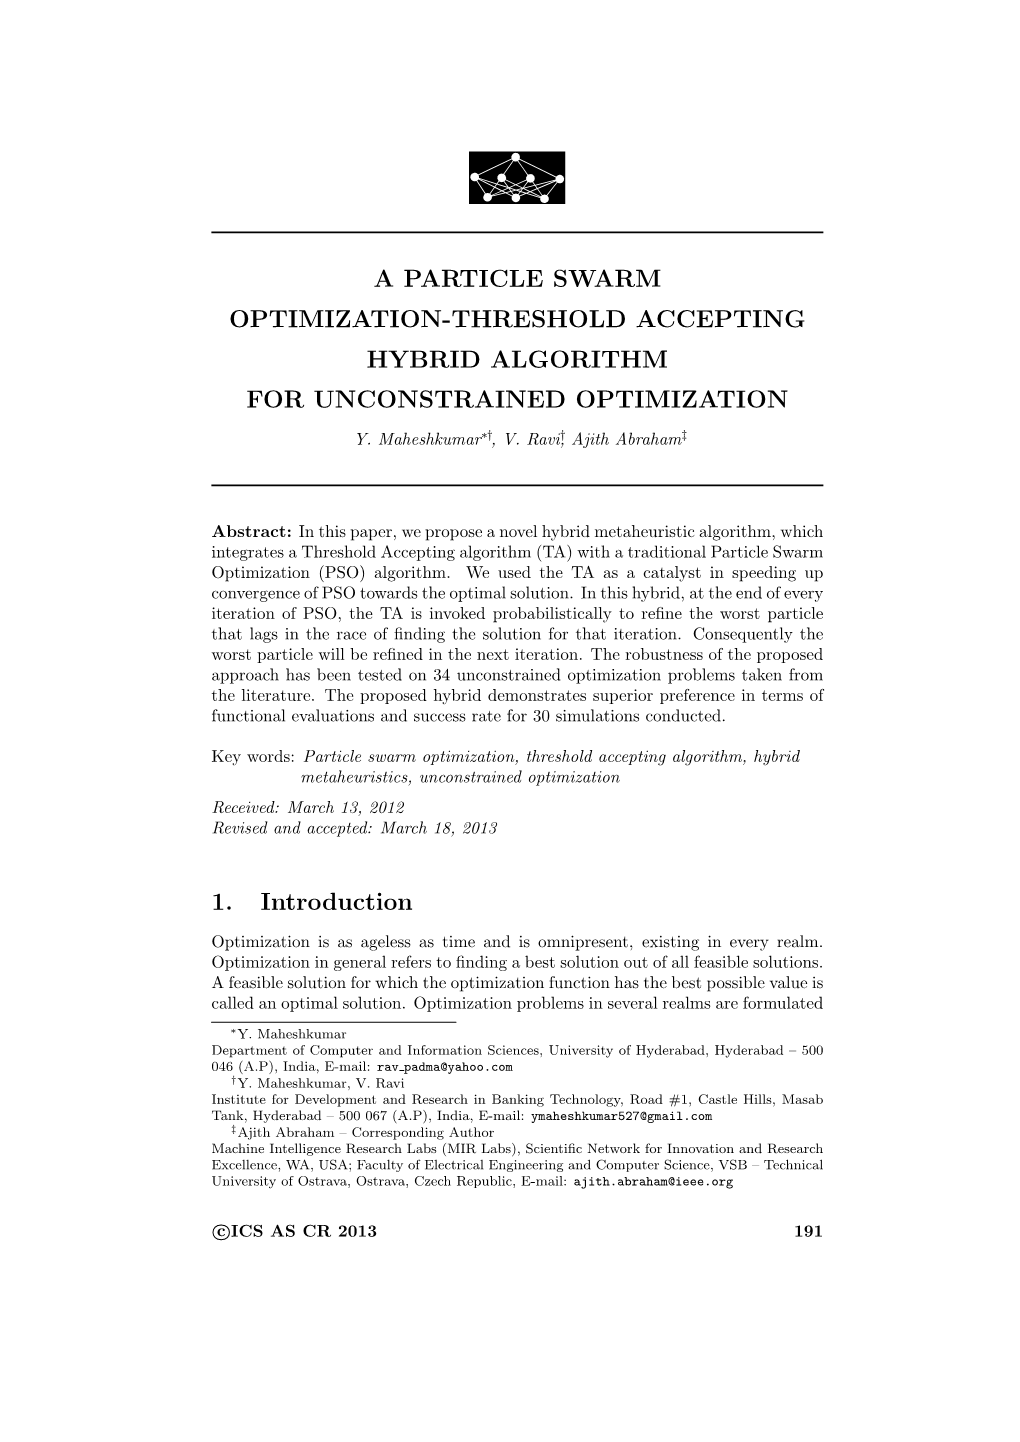 A Particle Swarm Optimization-Threshold Accepting Hybrid Algorithm for Unconstrained Optimization